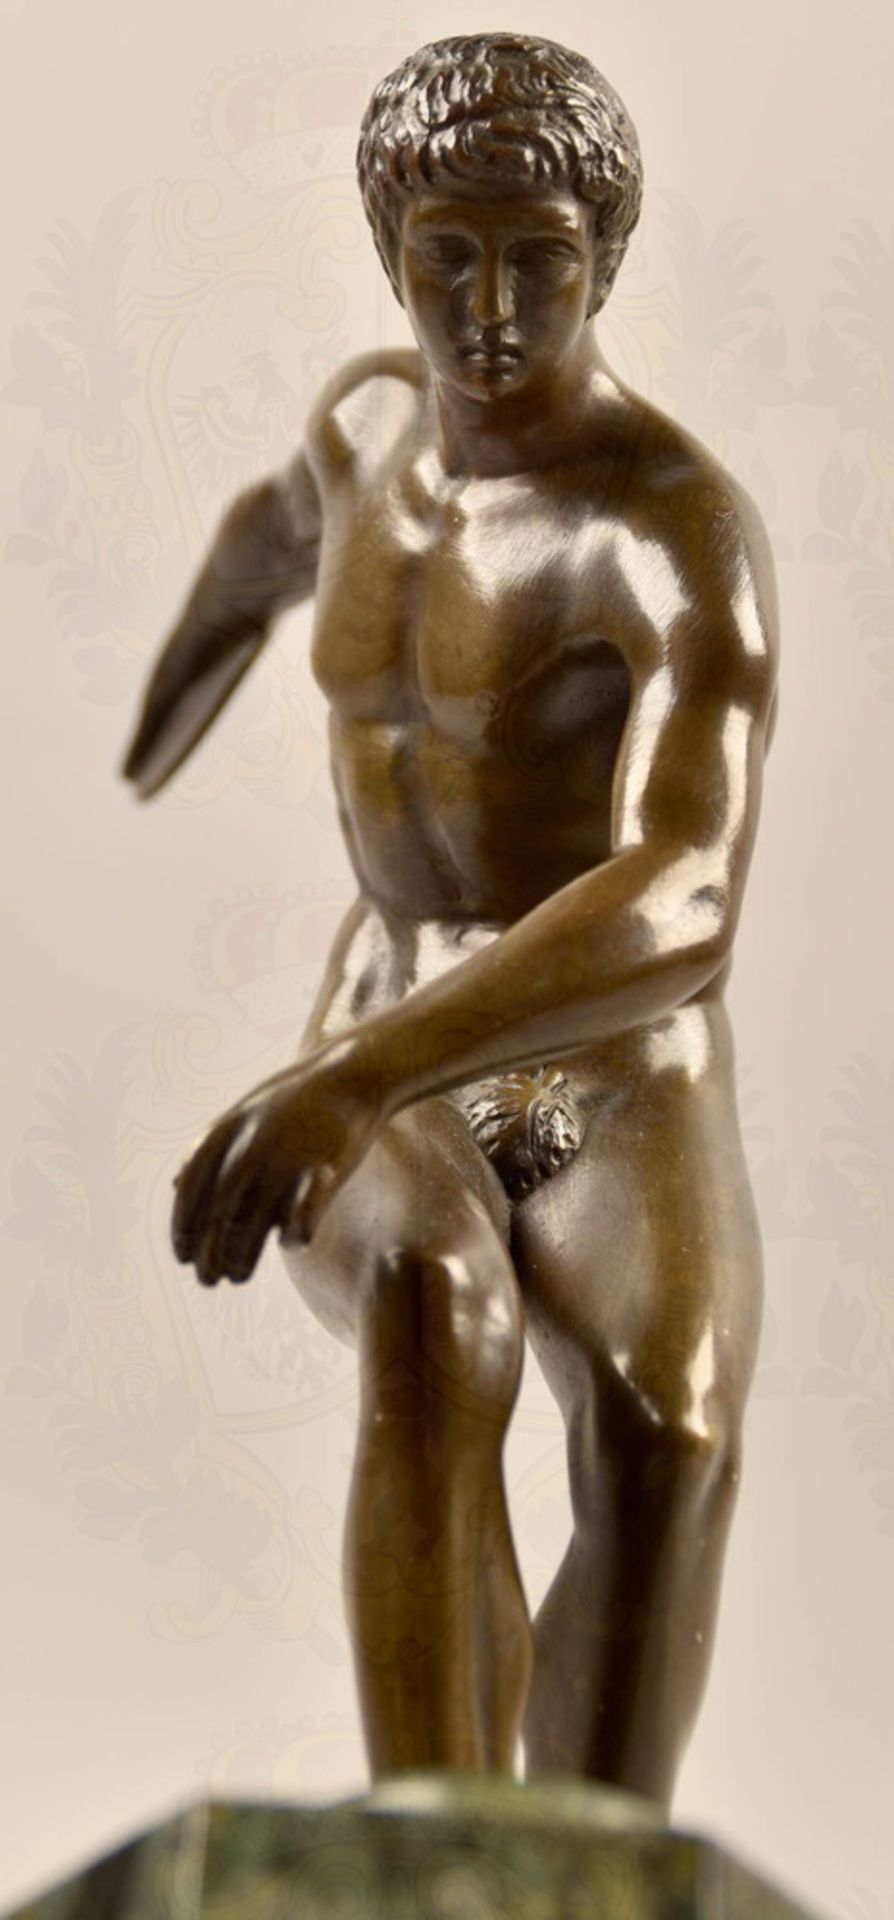 Bronze statuette Discus Thrower about 1935 - Image 5 of 6